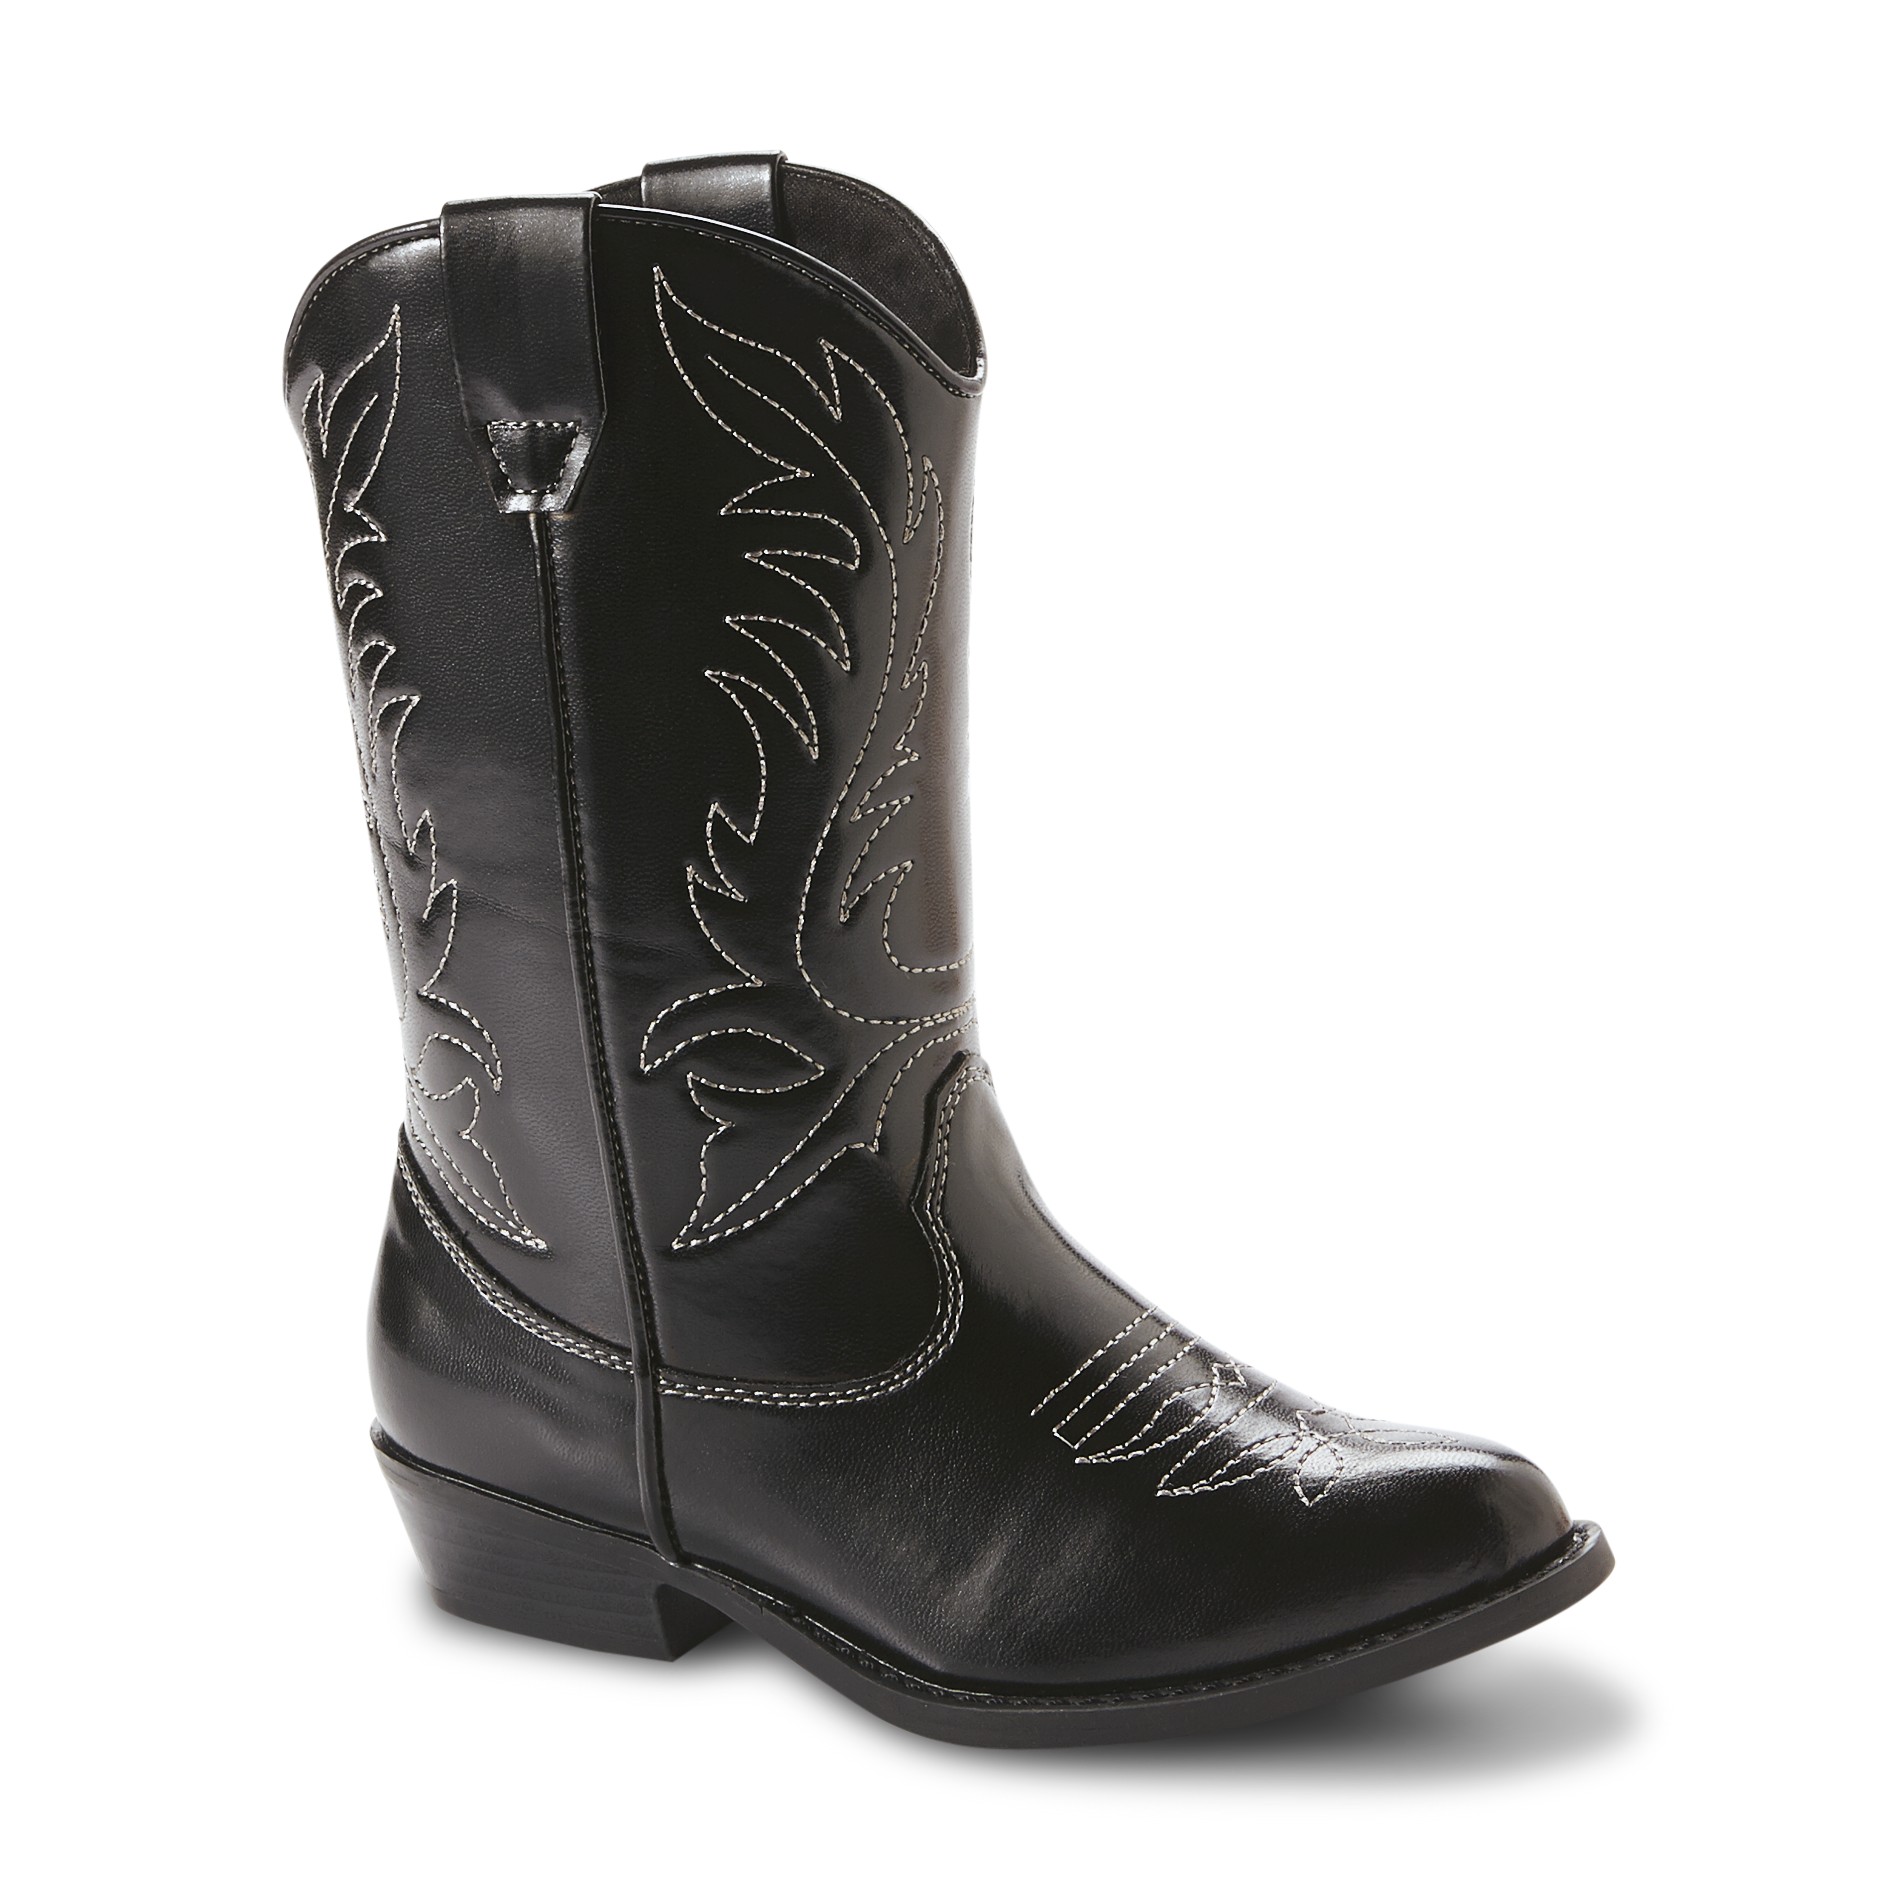 Route 66 Boy's Toby Western Boot - Black